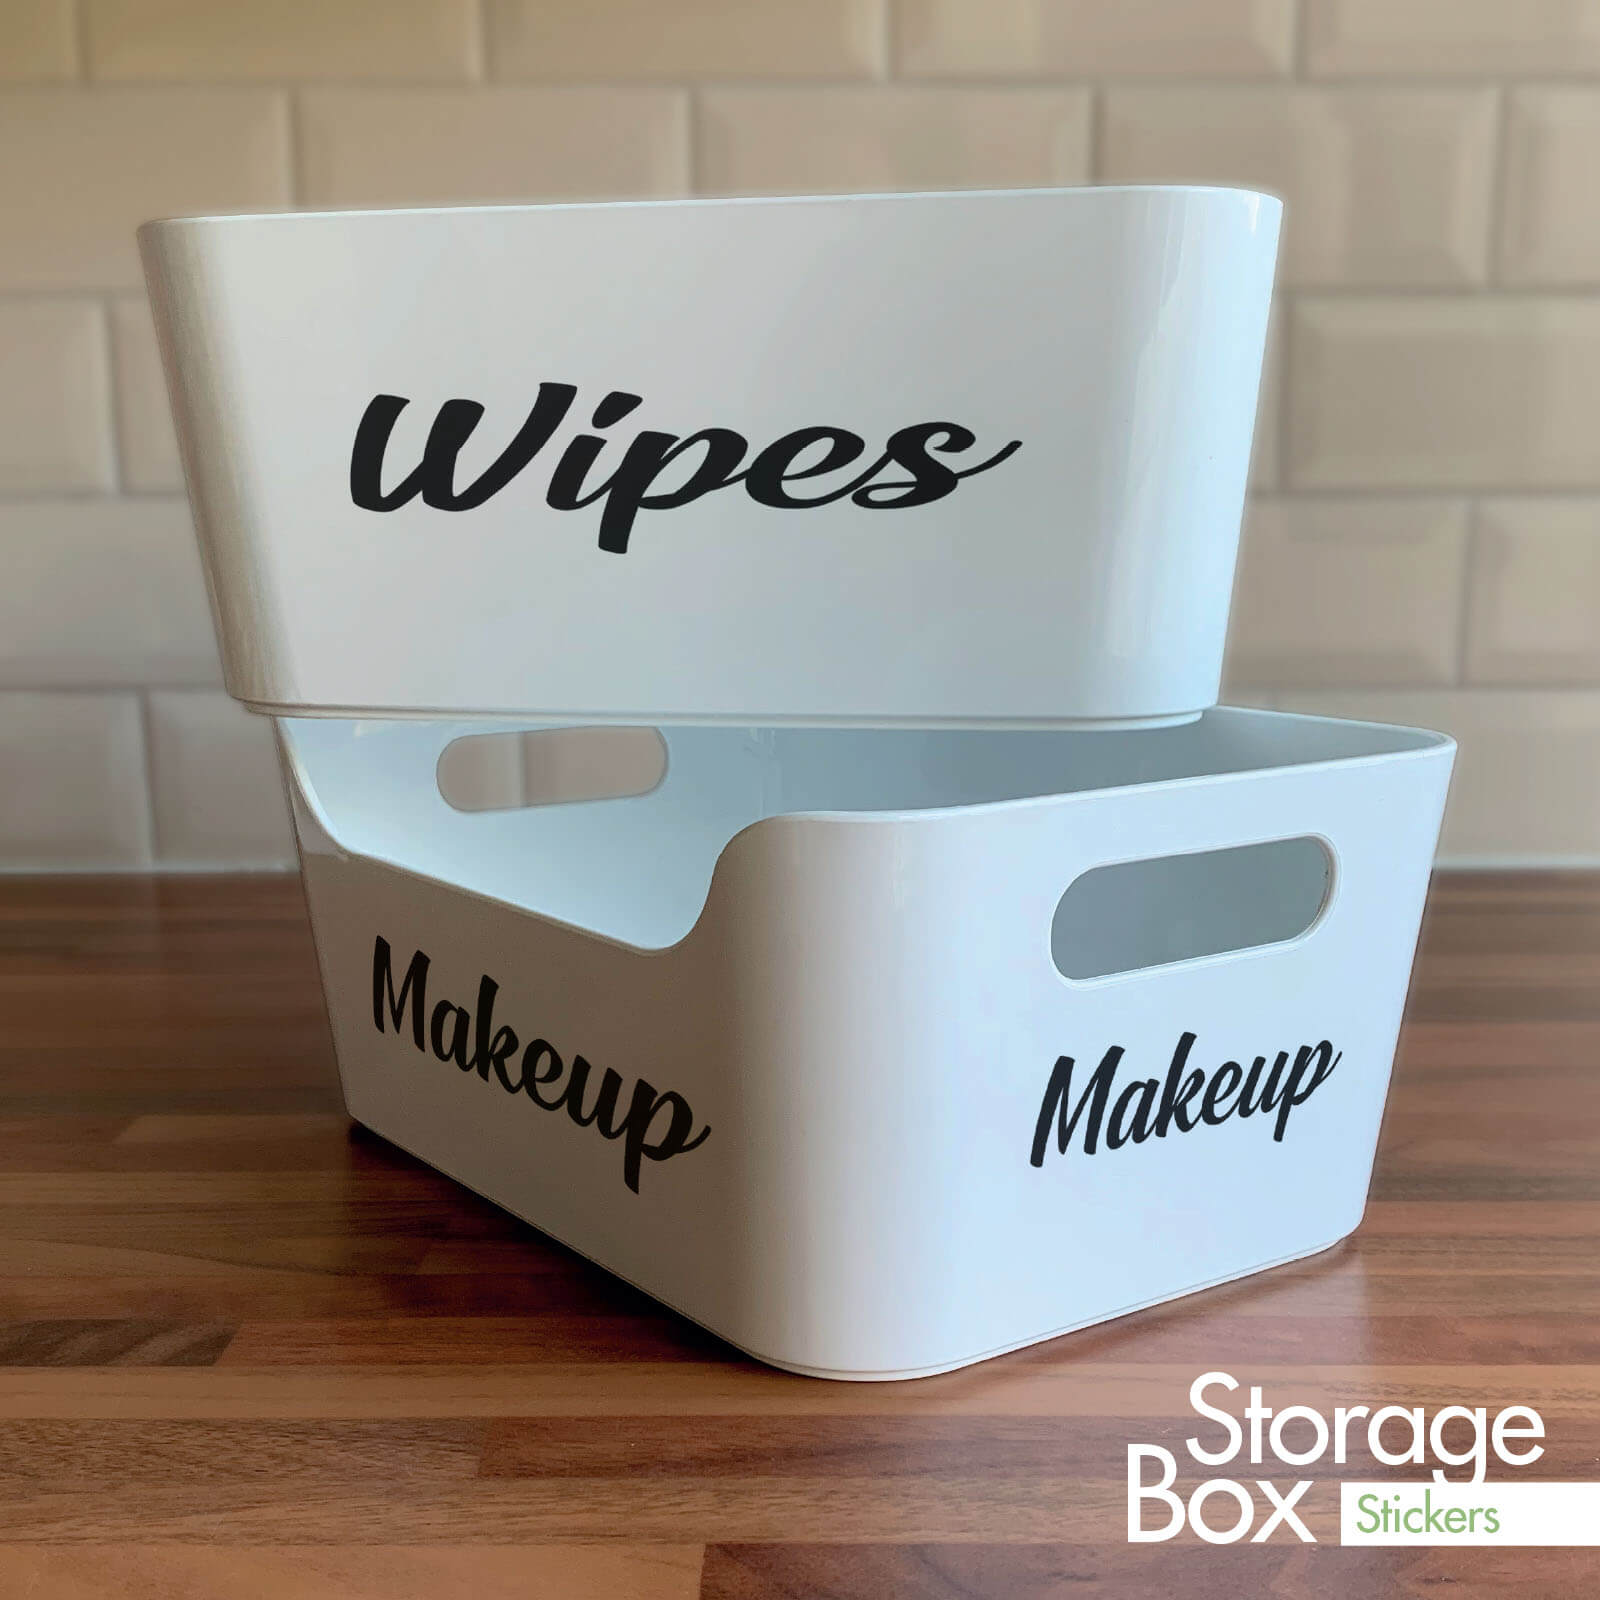 Box Stickers Makeup and Wipes